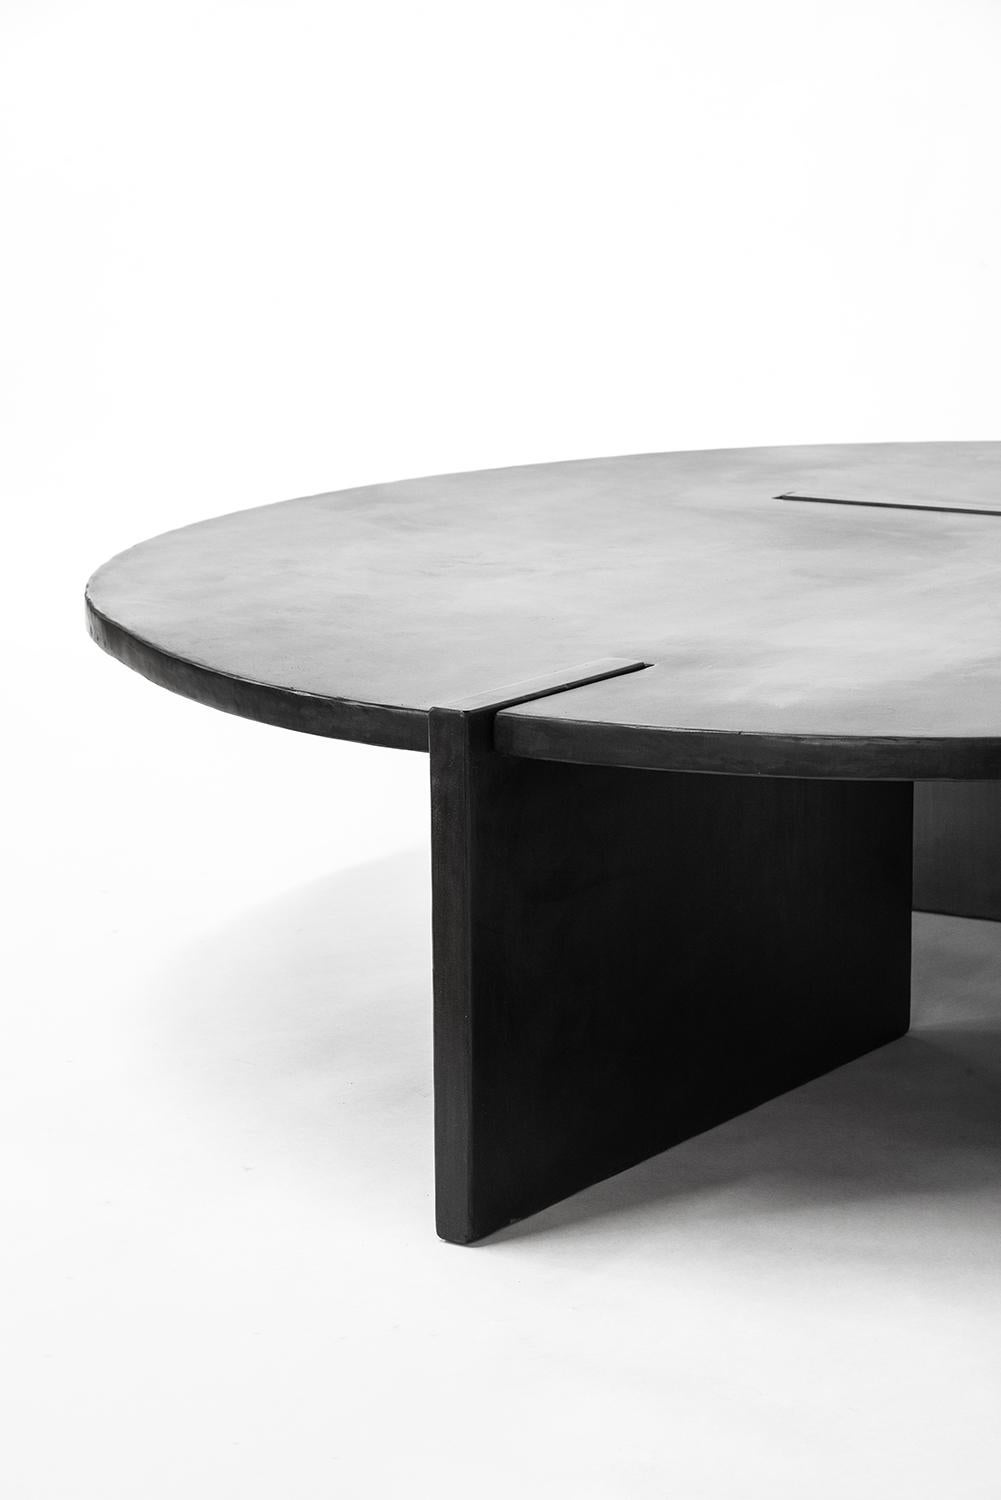 American Coffee Table Round Modern Contemporay Handmade Blackened Steel Waxed Large For Sale